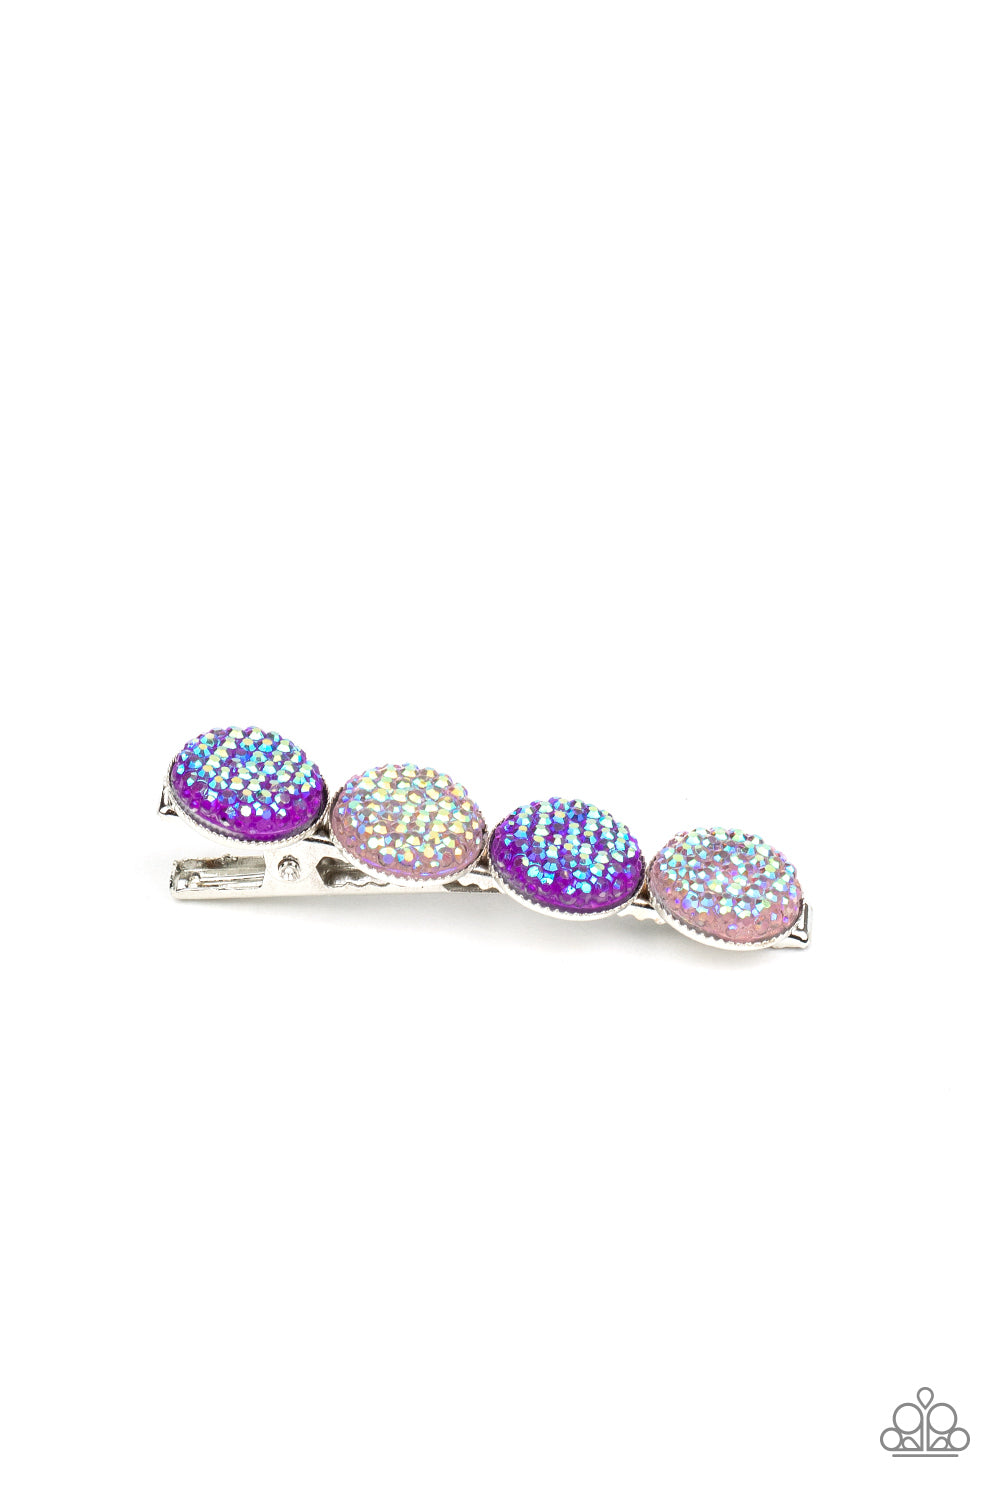 &lt;P&gt; Featuring an iridescent shimmer, pink and purple rhinestone dotted gems are encrusted across the front of a shiny silver bar for a colorfully bubbly look. Features a standard hair clip on the back.
&lt;/P&gt;

&lt;P&gt;&lt;I&gt;Sold as one individual hair clip.&lt;/I&gt;&lt;/P&gt;


&lt;img src=\&quot;https://d9b54x484lq62.cloudfront.net/paparazzi/shopping/images/517_tag150x115_1.png\&quot; alt=\&quot;New Kit\&quot; align=\&quot;middle\&quot; height=\&quot;50\&quot; width=\&quot;50\&quot;/&gt;